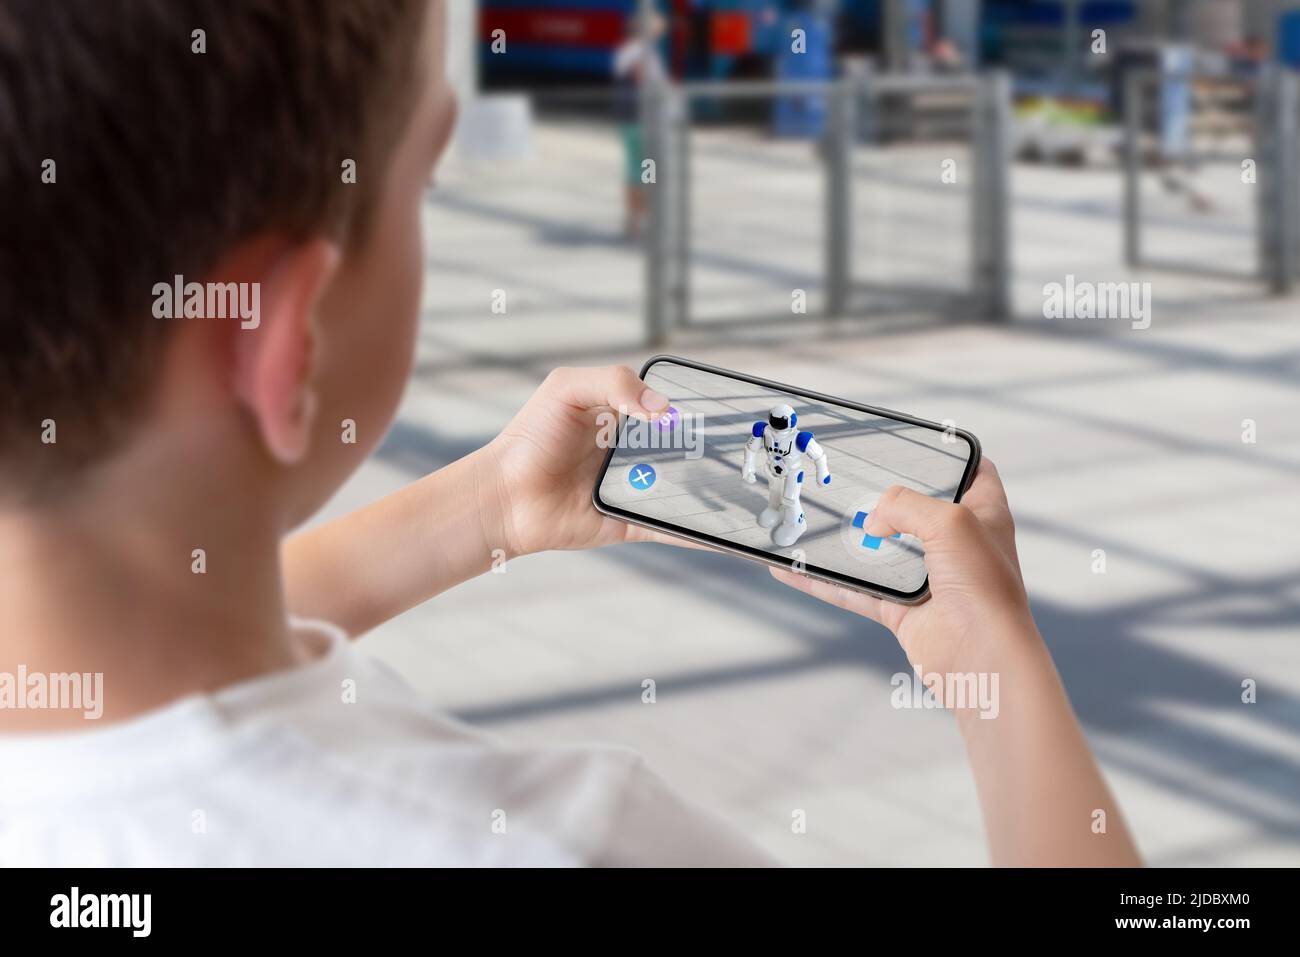 Boy programs and controls the robot on the street via augmented reality technology concept Stock Photo